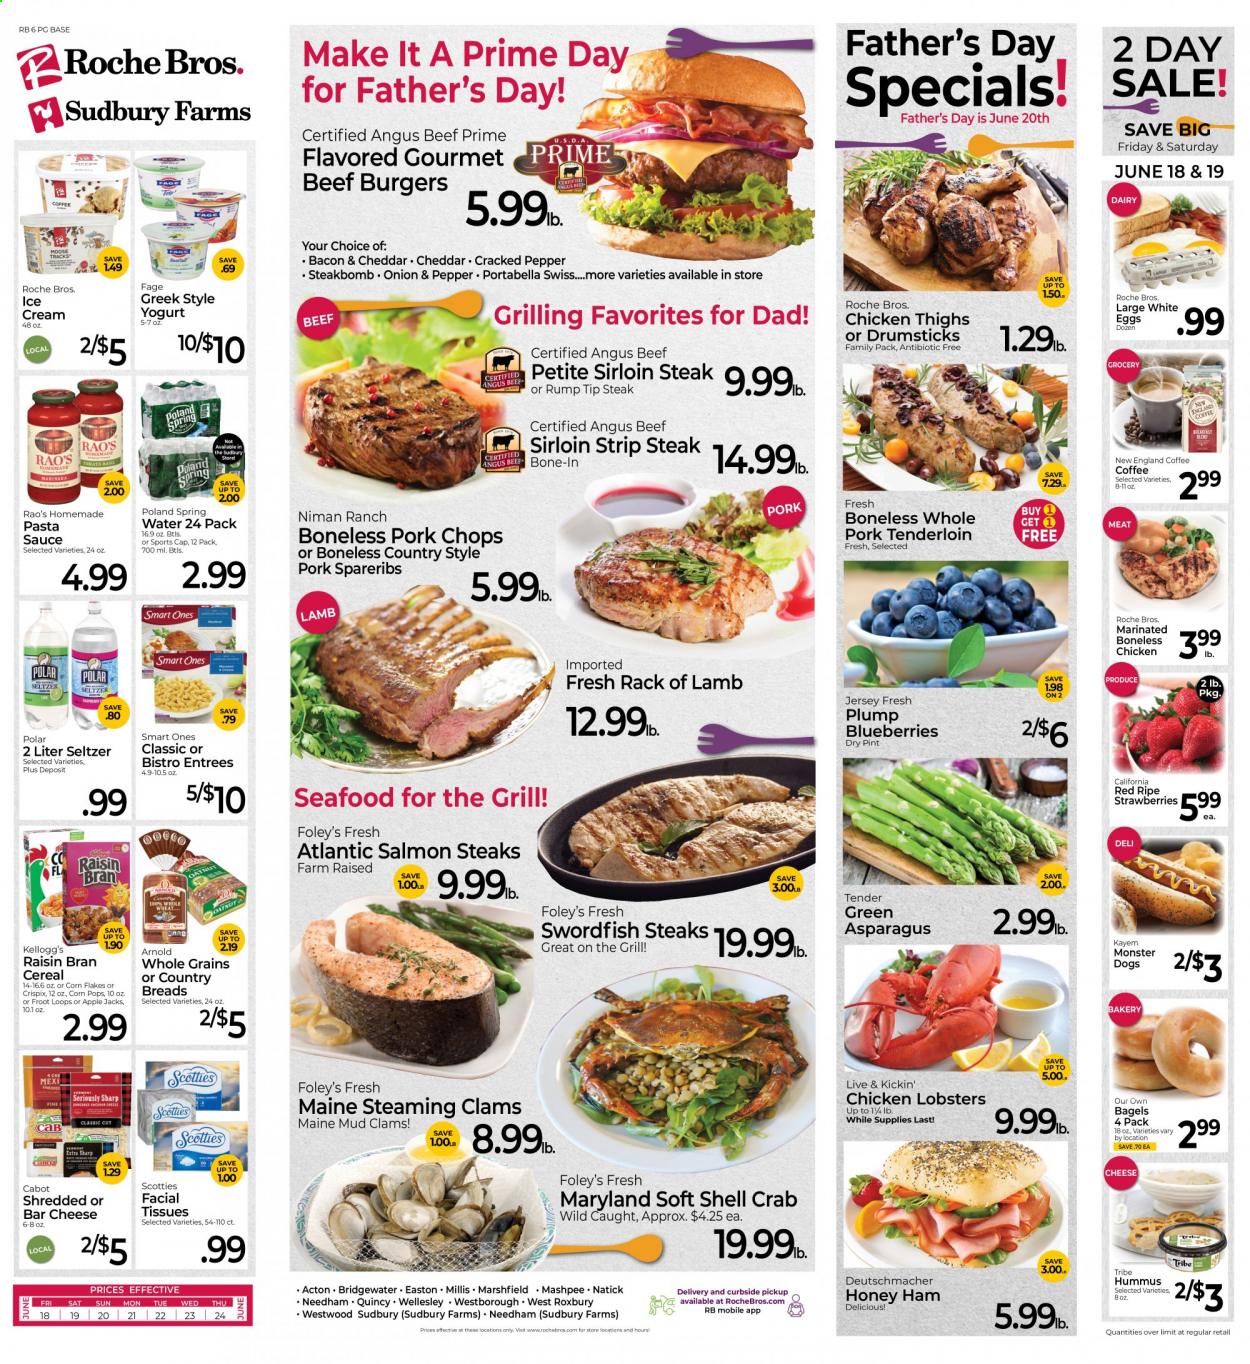 thumbnail - Roche Bros. Flyer - 06/18/2021 - 06/24/2021 - Sales products - bagels, asparagus, blueberries, strawberries, clams, lobster, salmon, swordfish, seafood, crab, pasta sauce, hamburger, sauce, beef burger, bacon, ham, hummus, cheese, yoghurt, eggs, ice cream, Kellogg's, cereals, corn flakes, Corn Pops, Raisin Bran, Monster, seltzer water, coffee, chicken thighs, beef meat, beef sirloin, steak, sirloin steak, striploin steak, pork chops, pork meat, pork tenderloin, pork spare ribs, lamb meat, rack of lamb, tissues, facial tissues. Page 1.